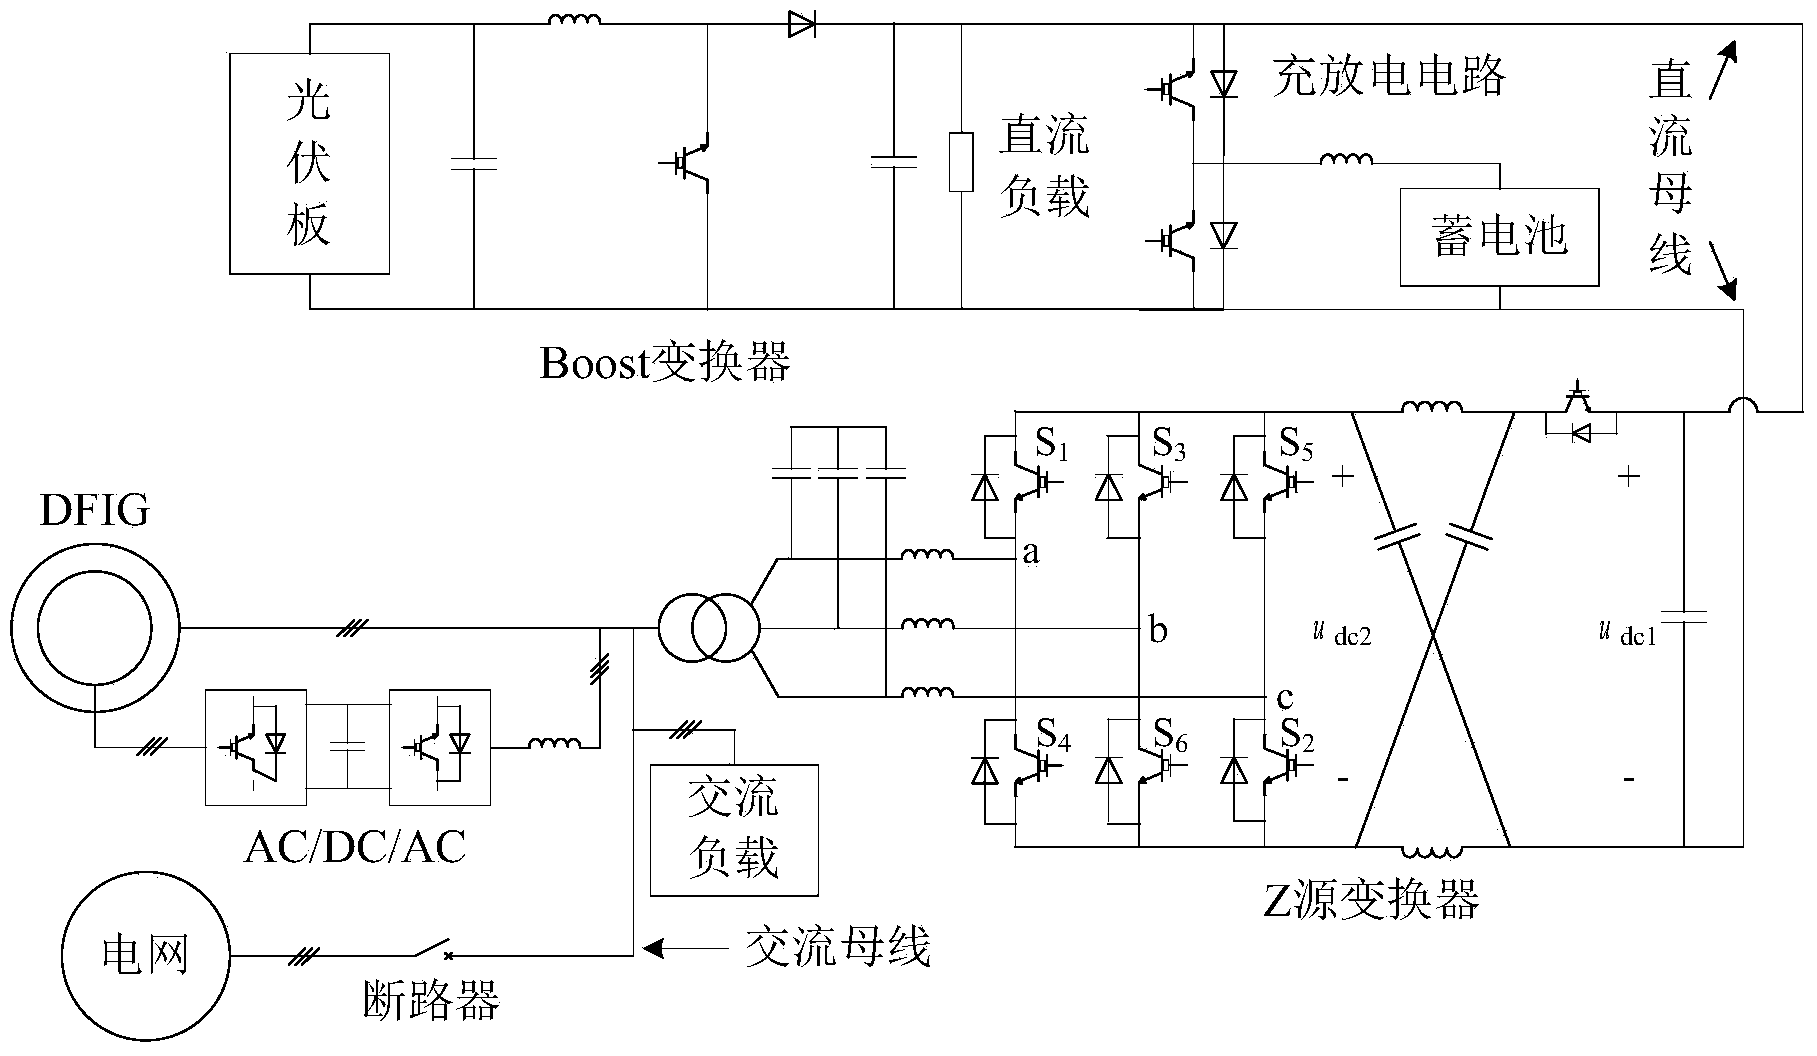 Alternating current and direct current mixed micro power grid comprising Z source converter and coordination control strategy